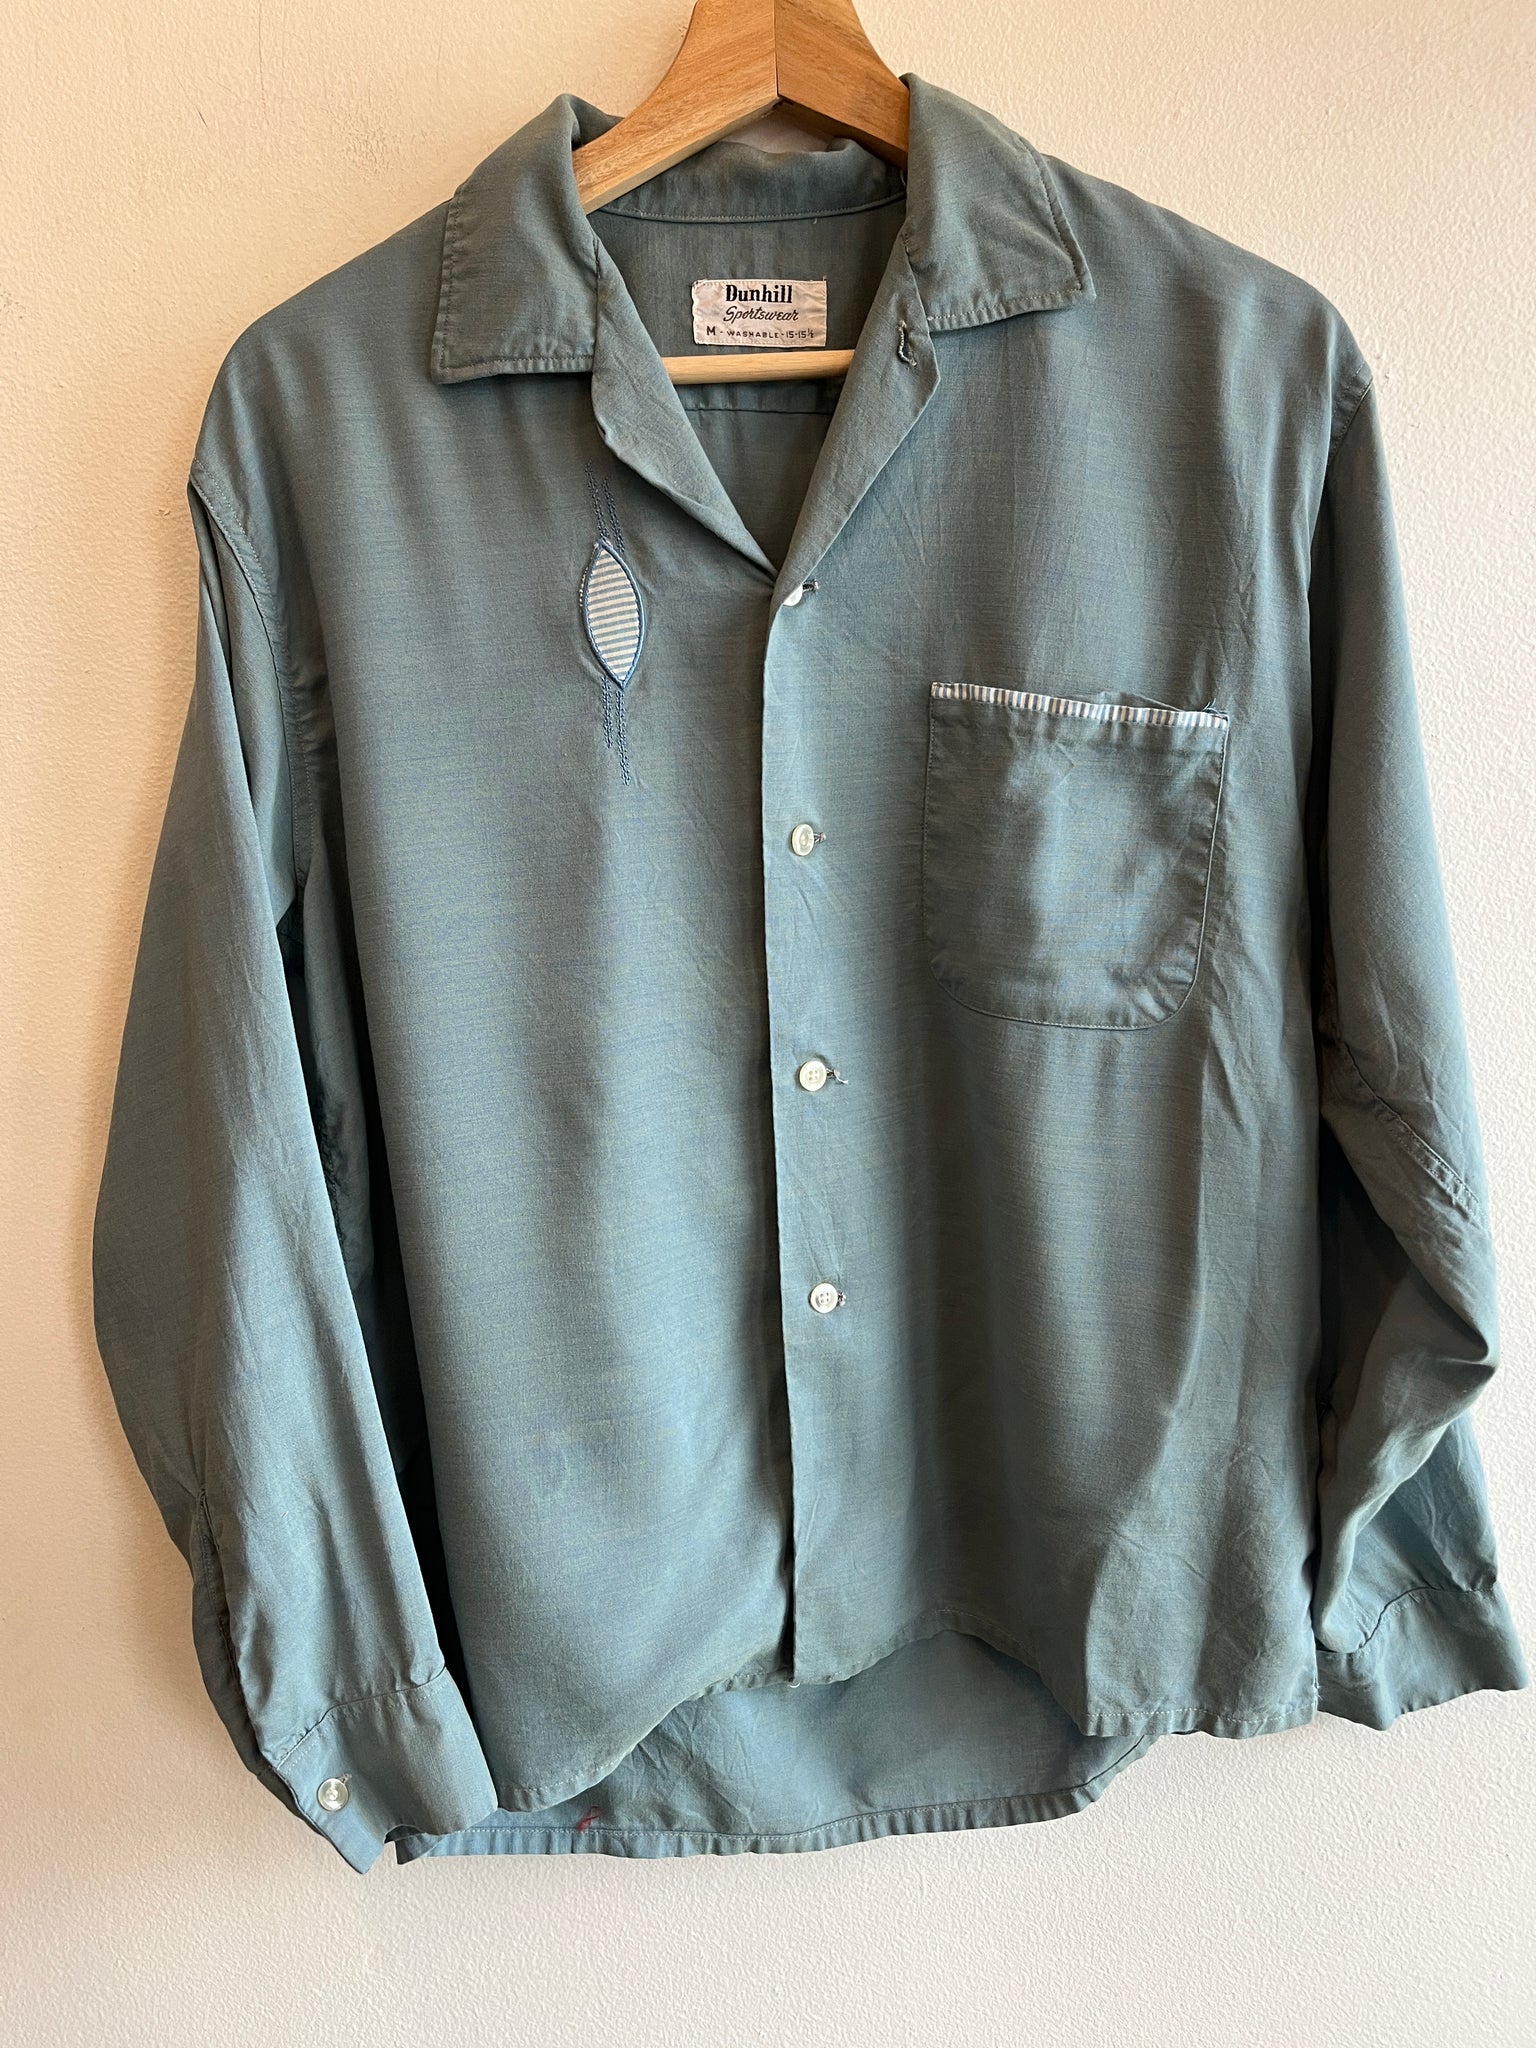 Vintage 1960’s Dunhill Sportswear Button-Up Shirt